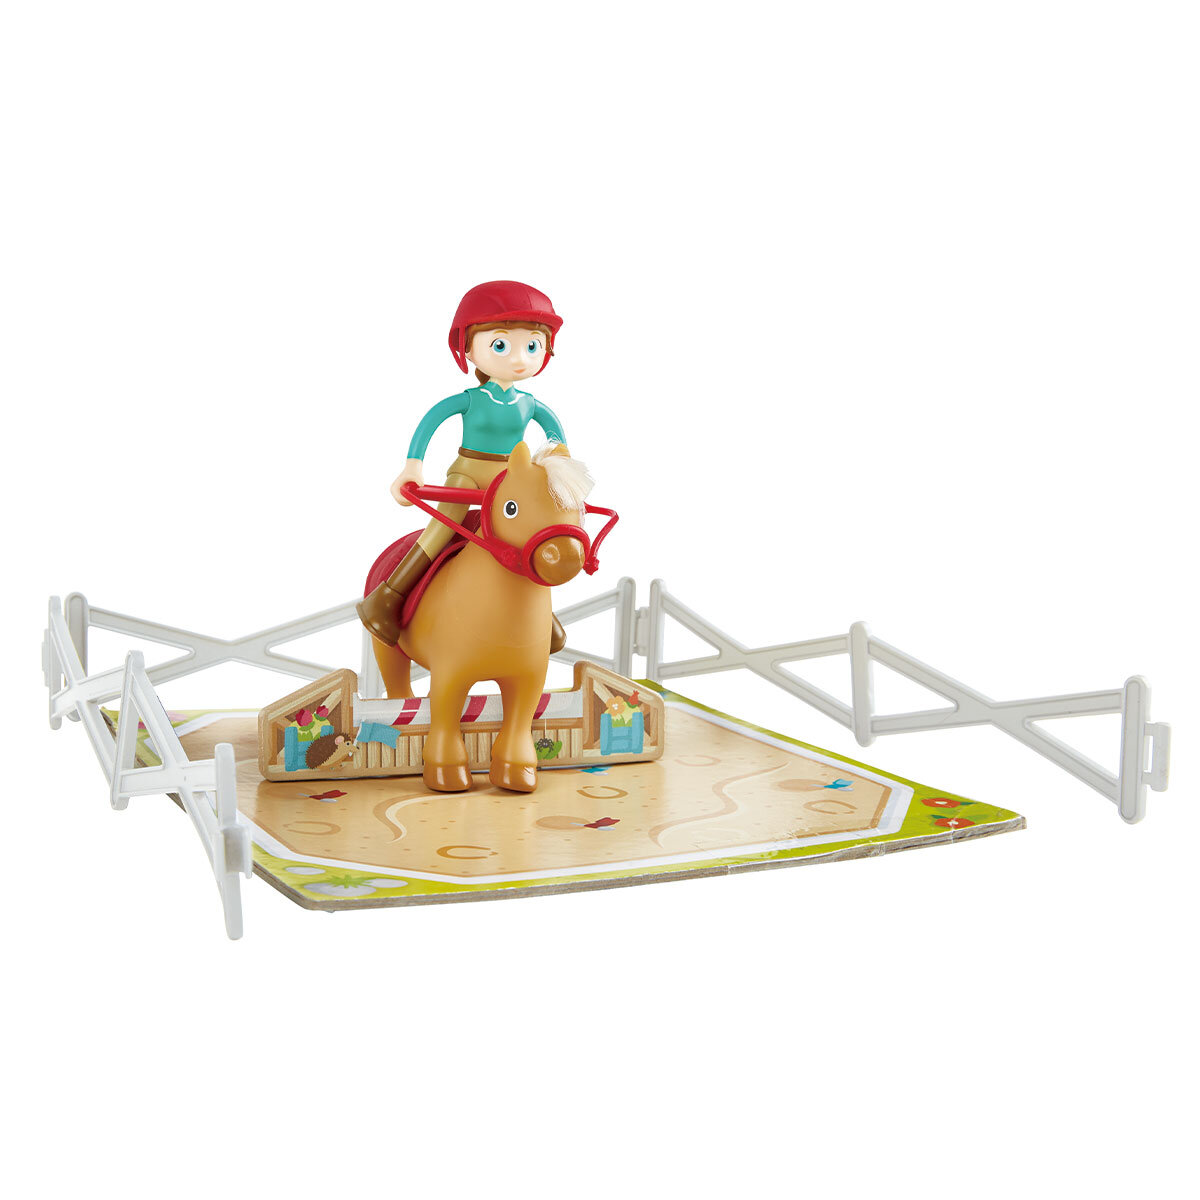 Buy Hape Pony Club Ranch Feature1 Image at Costco.co.uk